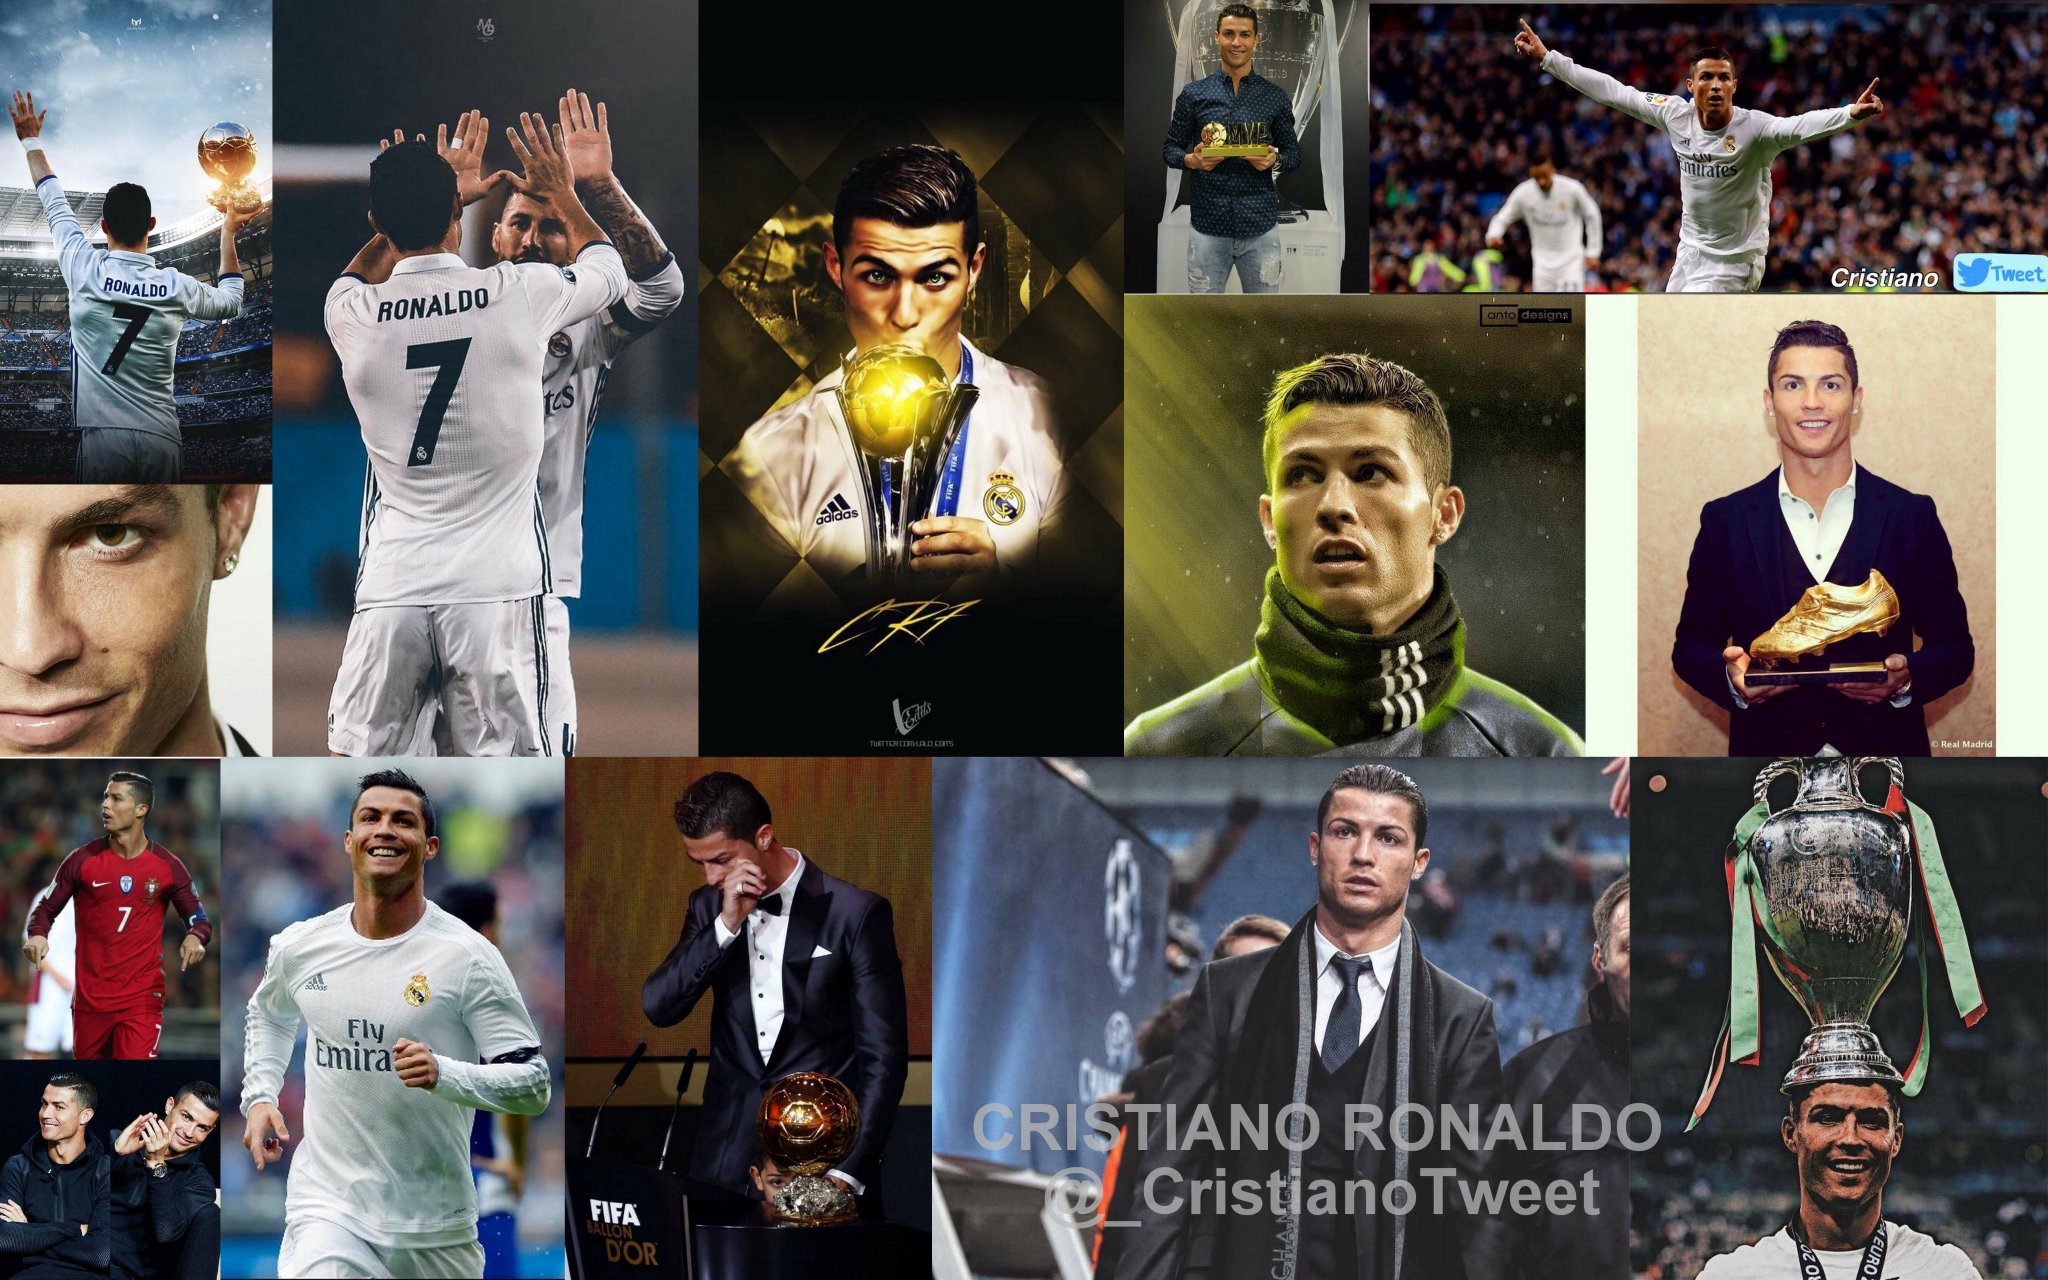 Happy birthday to the best player in the world, a Manchester united legend Cristiano ronaldo       